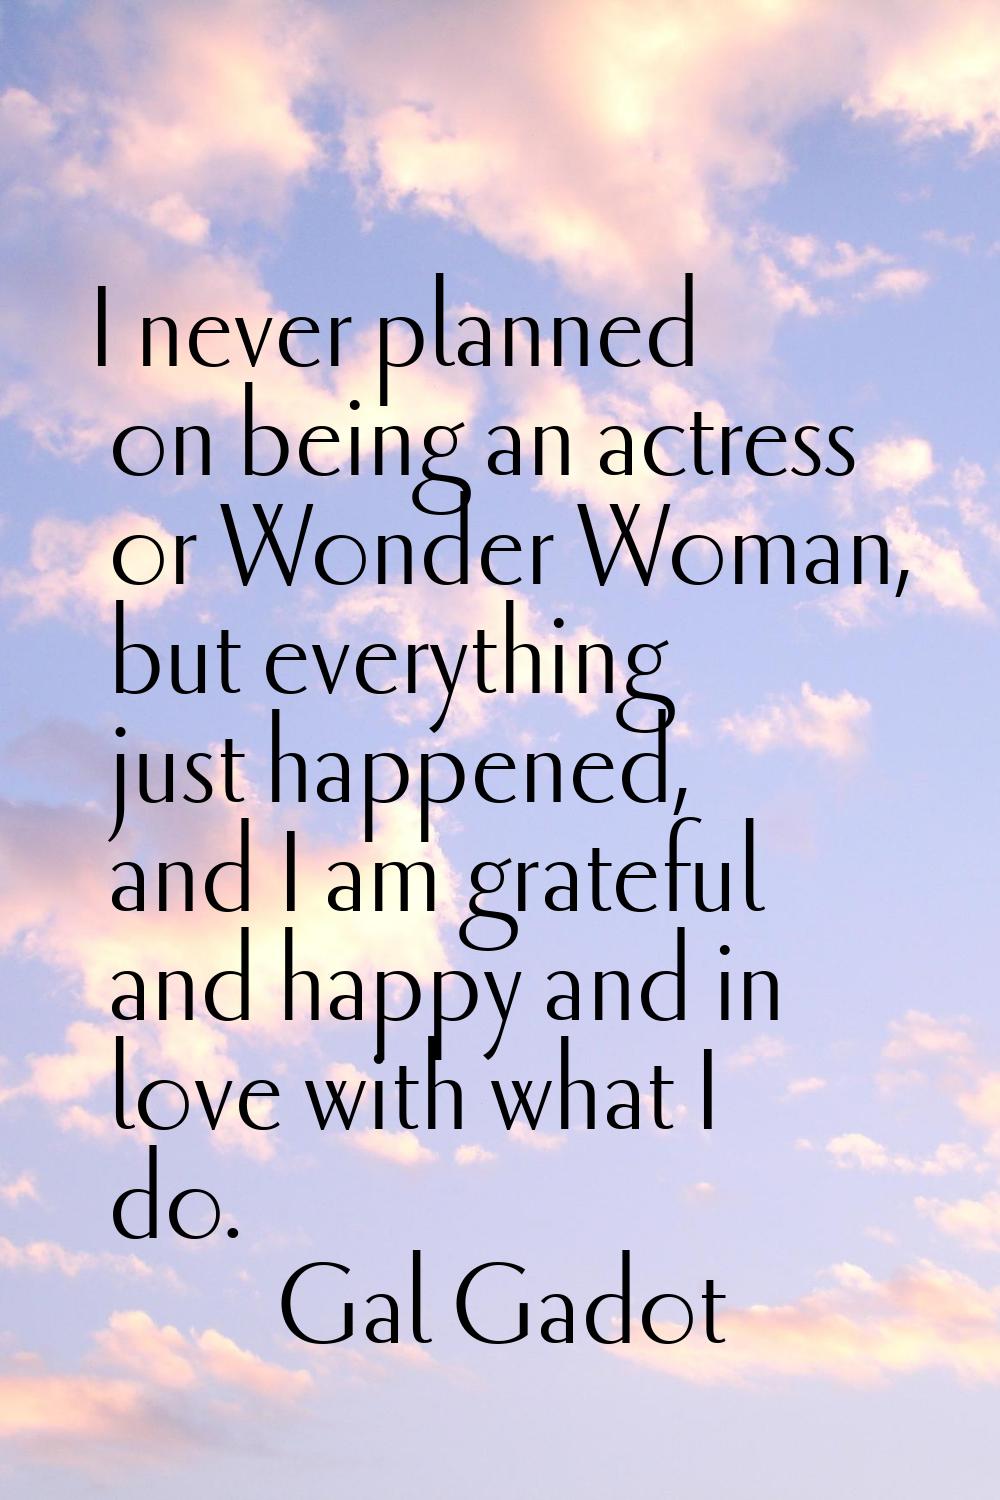 I never planned on being an actress or Wonder Woman, but everything just happened, and I am gratefu